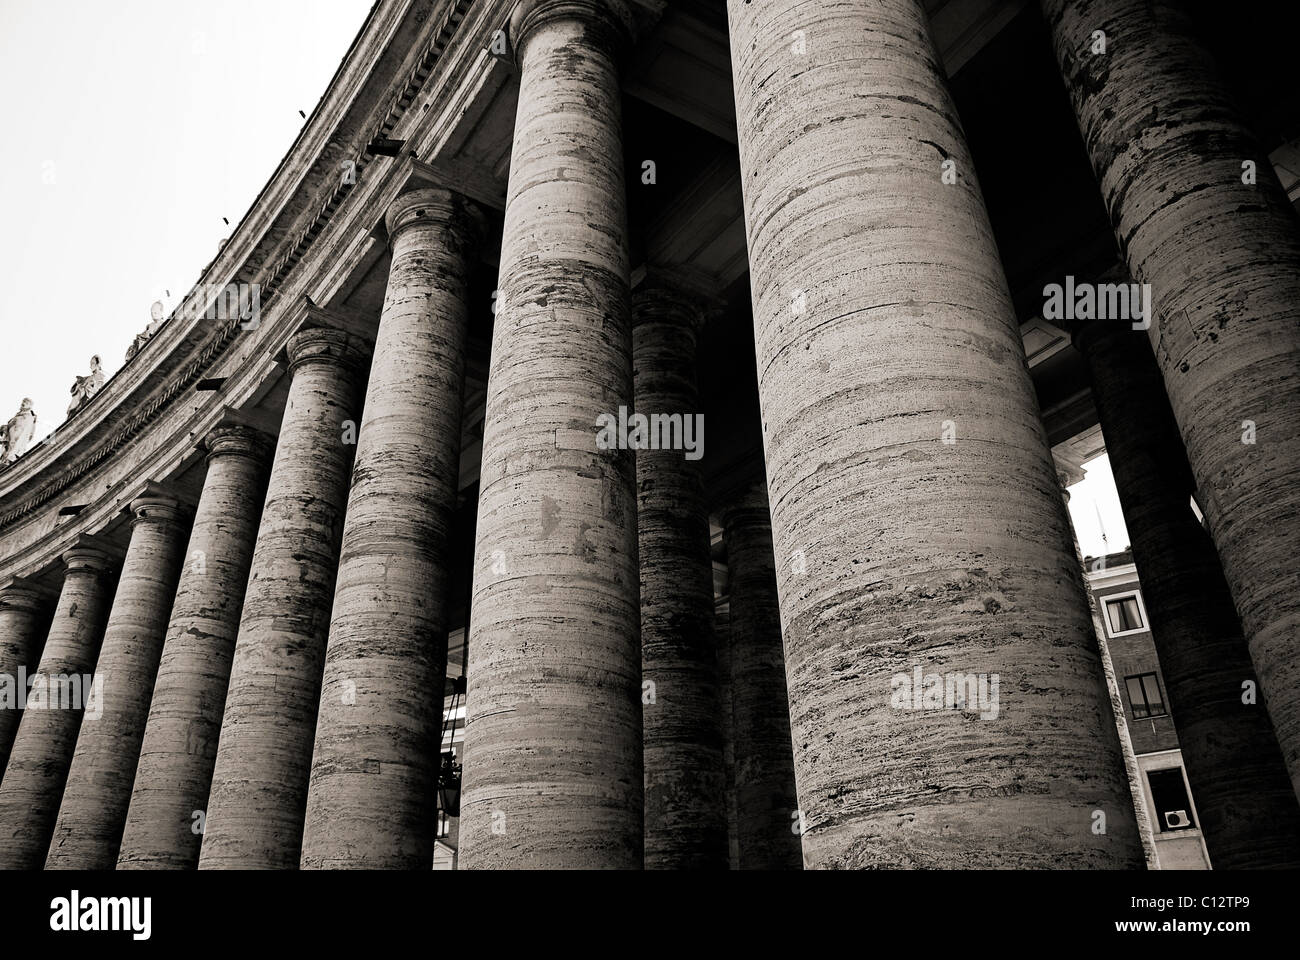 St. Peter's Square, Vatican City, Rome, Italy Stock Photo